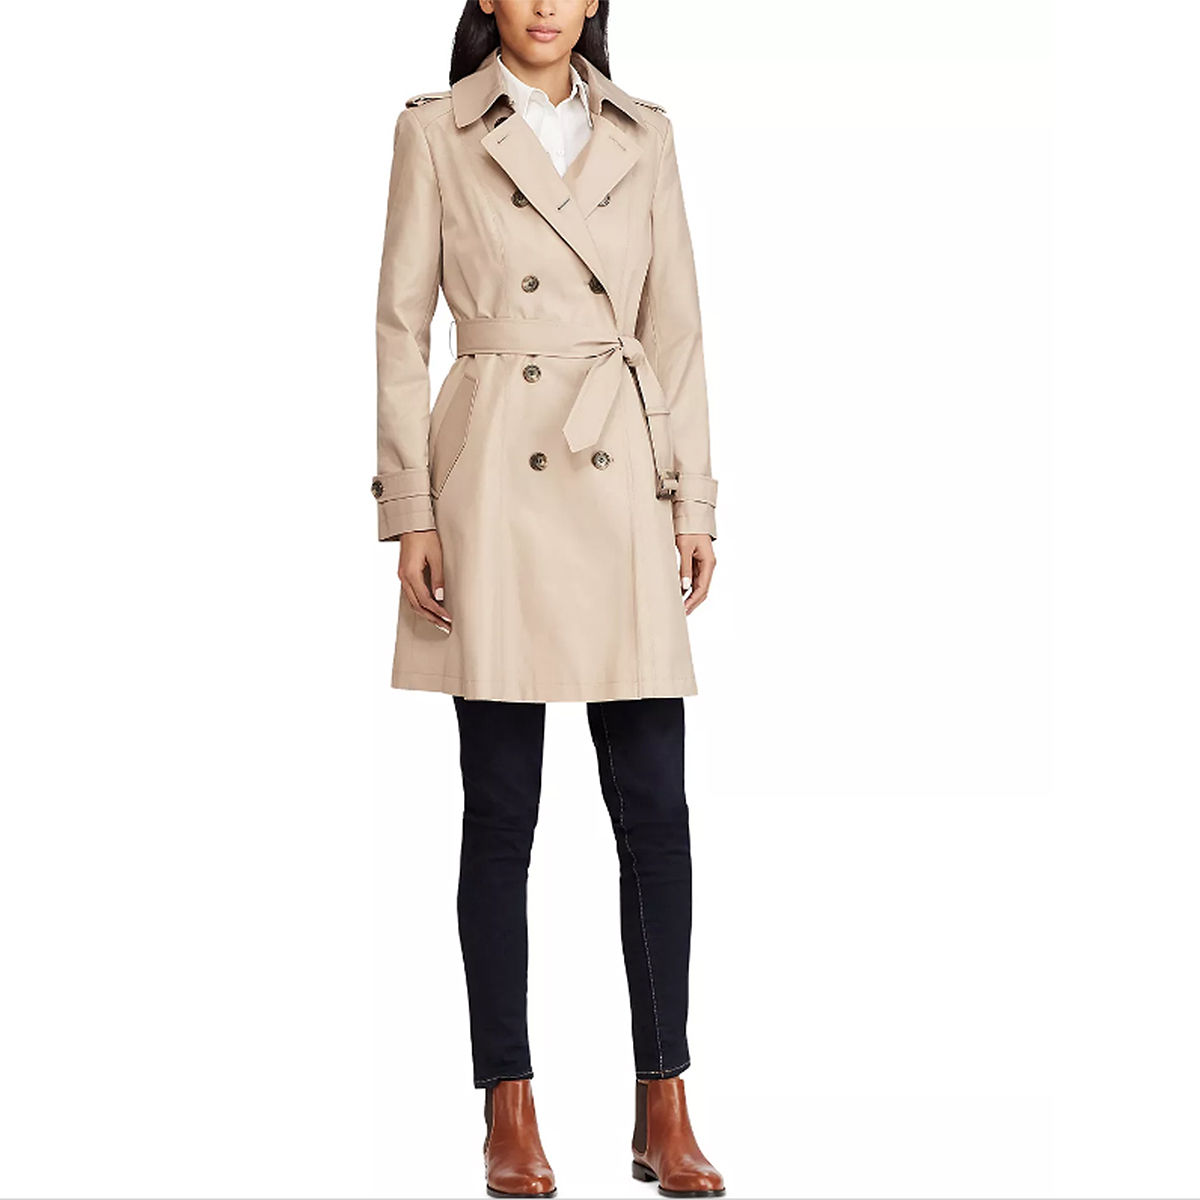 11 Coats and Jackets on Sale at Macy's — Up to 50% Off